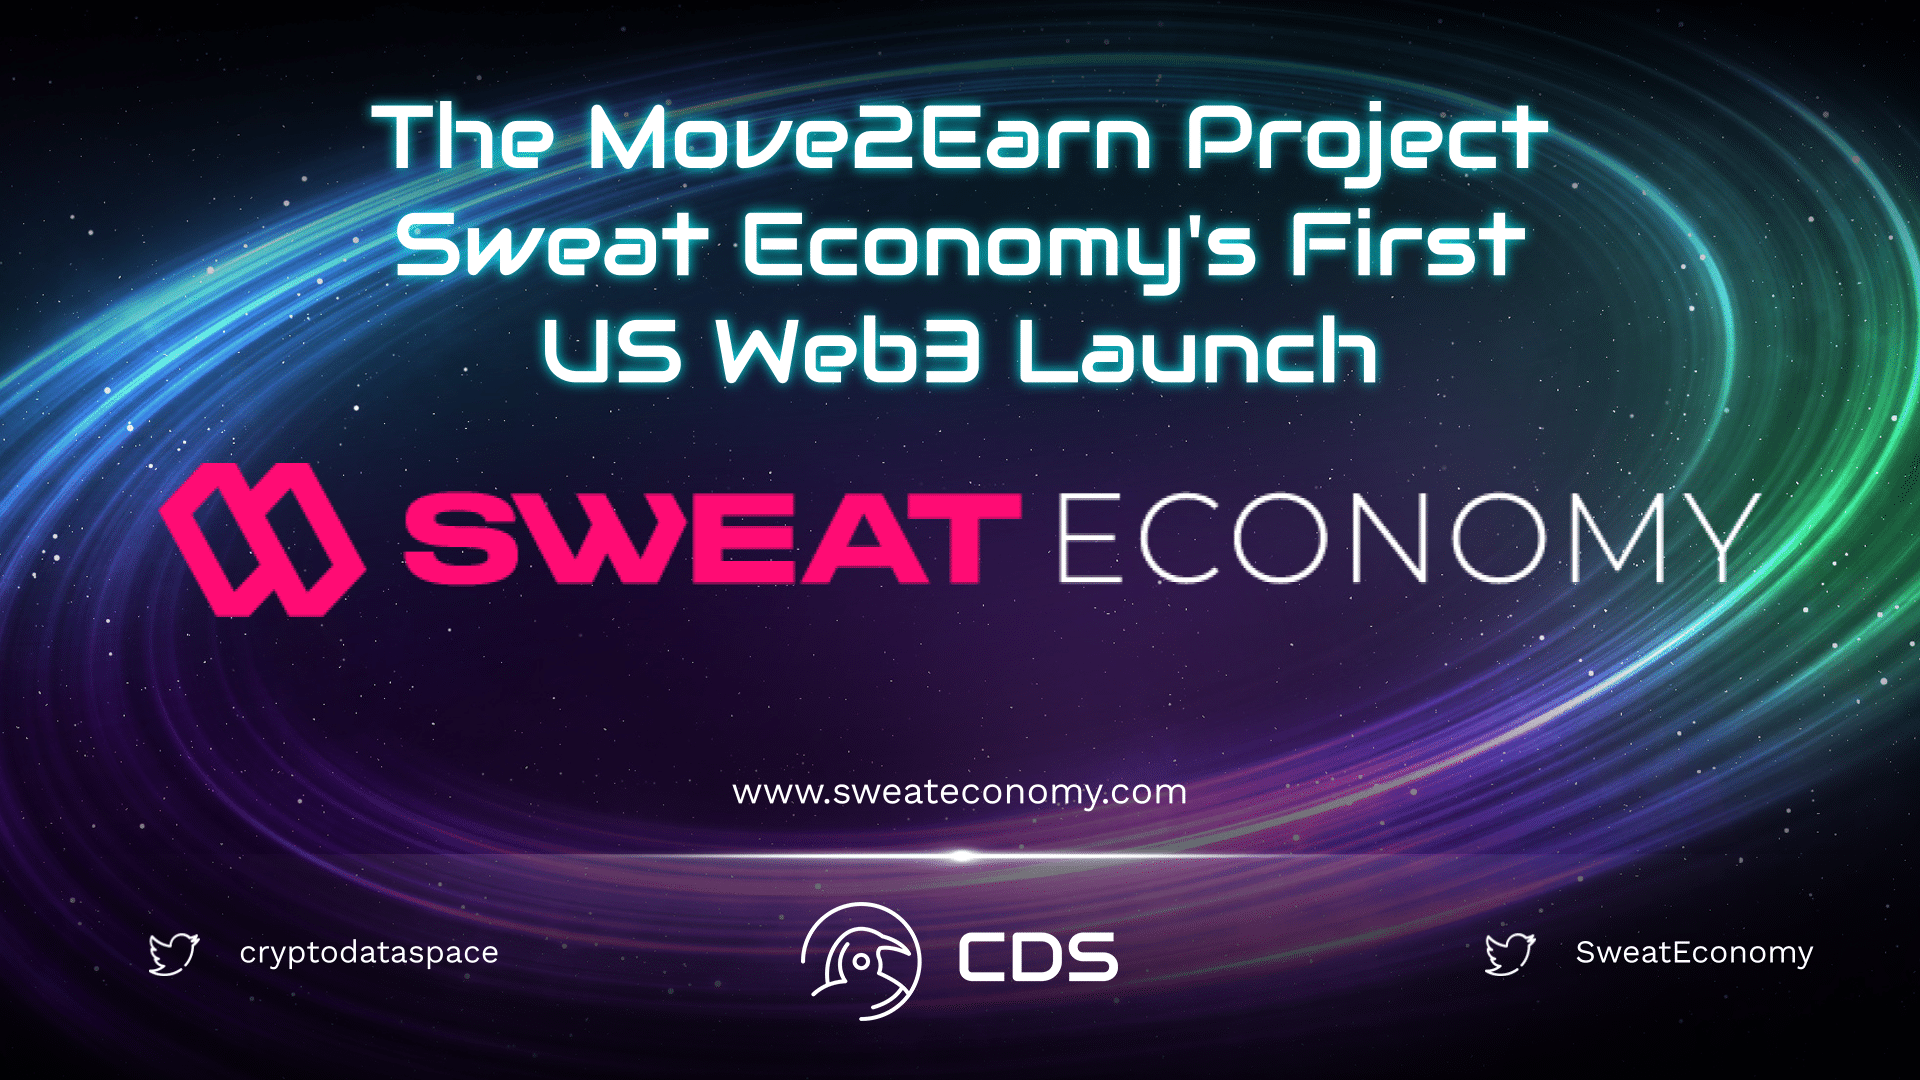 The Move2Earn Project Sweat Economy's First US Web3 Launch